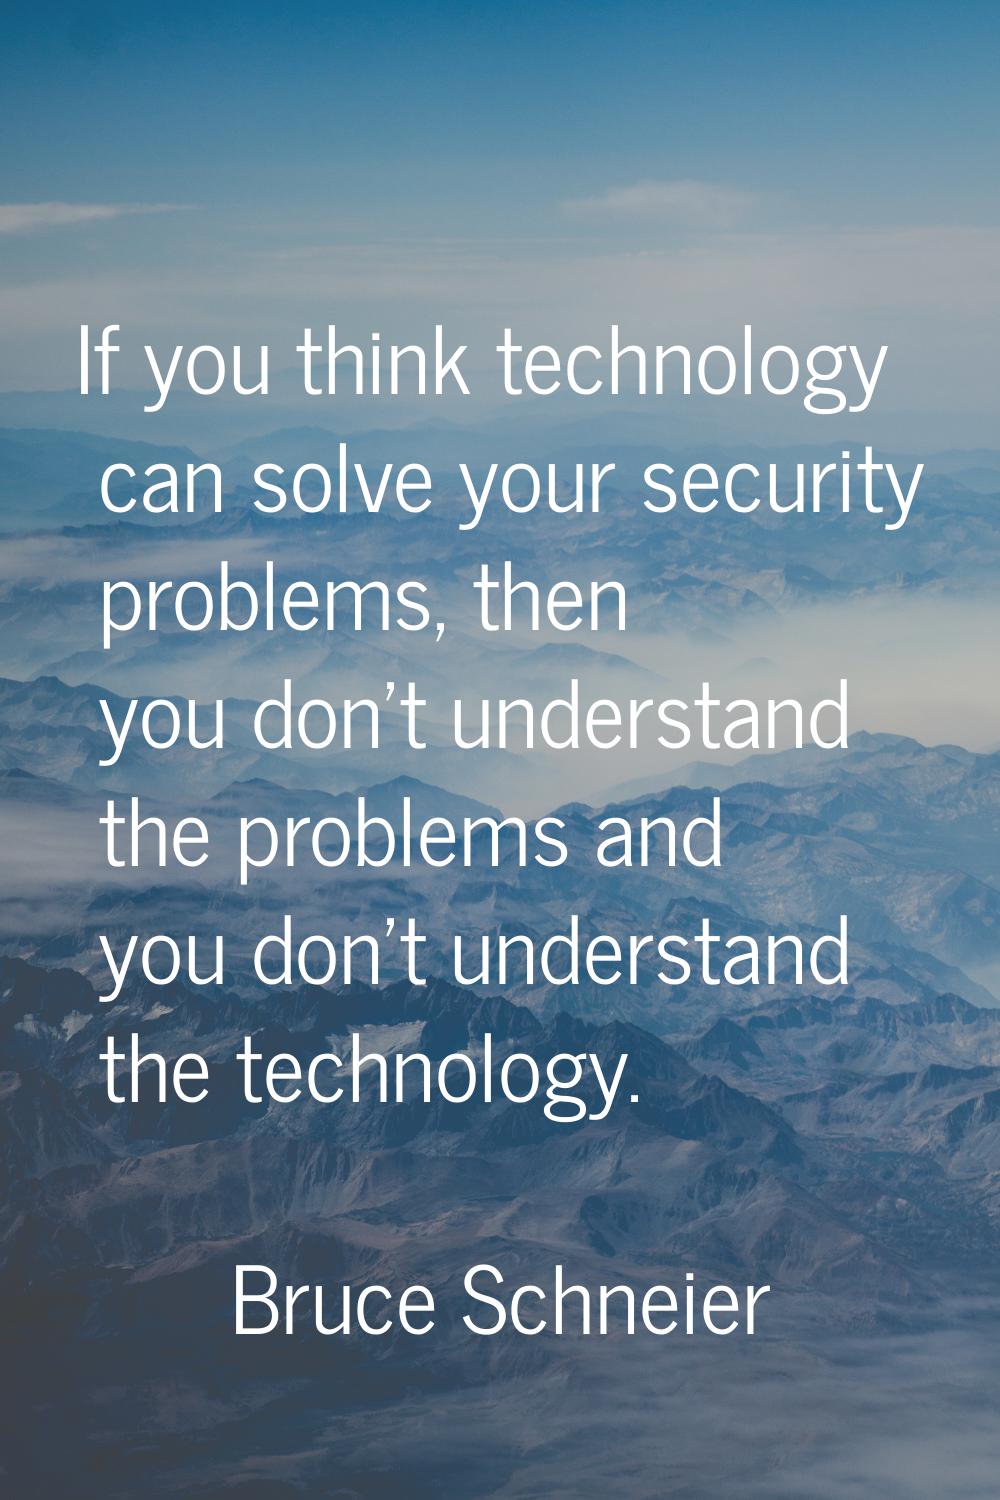 If you think technology can solve your security problems, then you don't understand the problems an